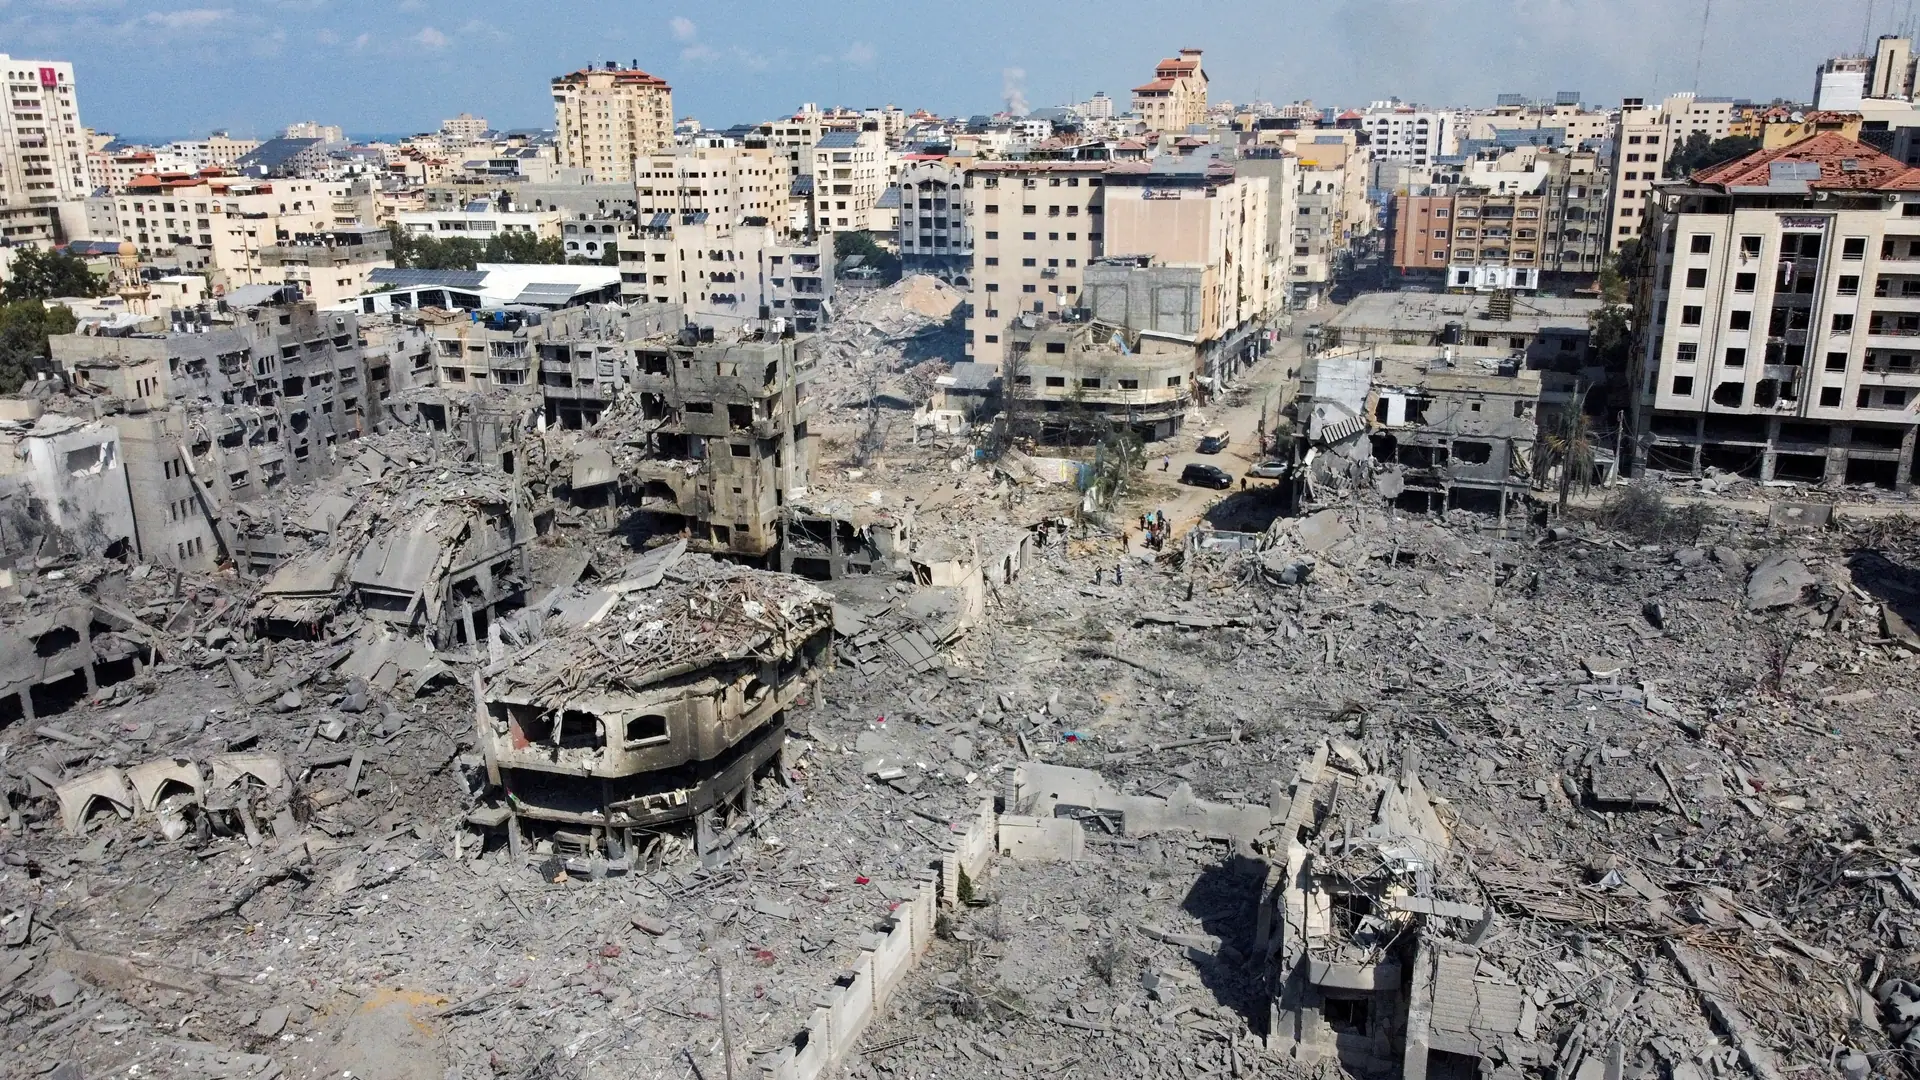 View shows houses and buildings destroyed by Israeli strikes in Gaza City